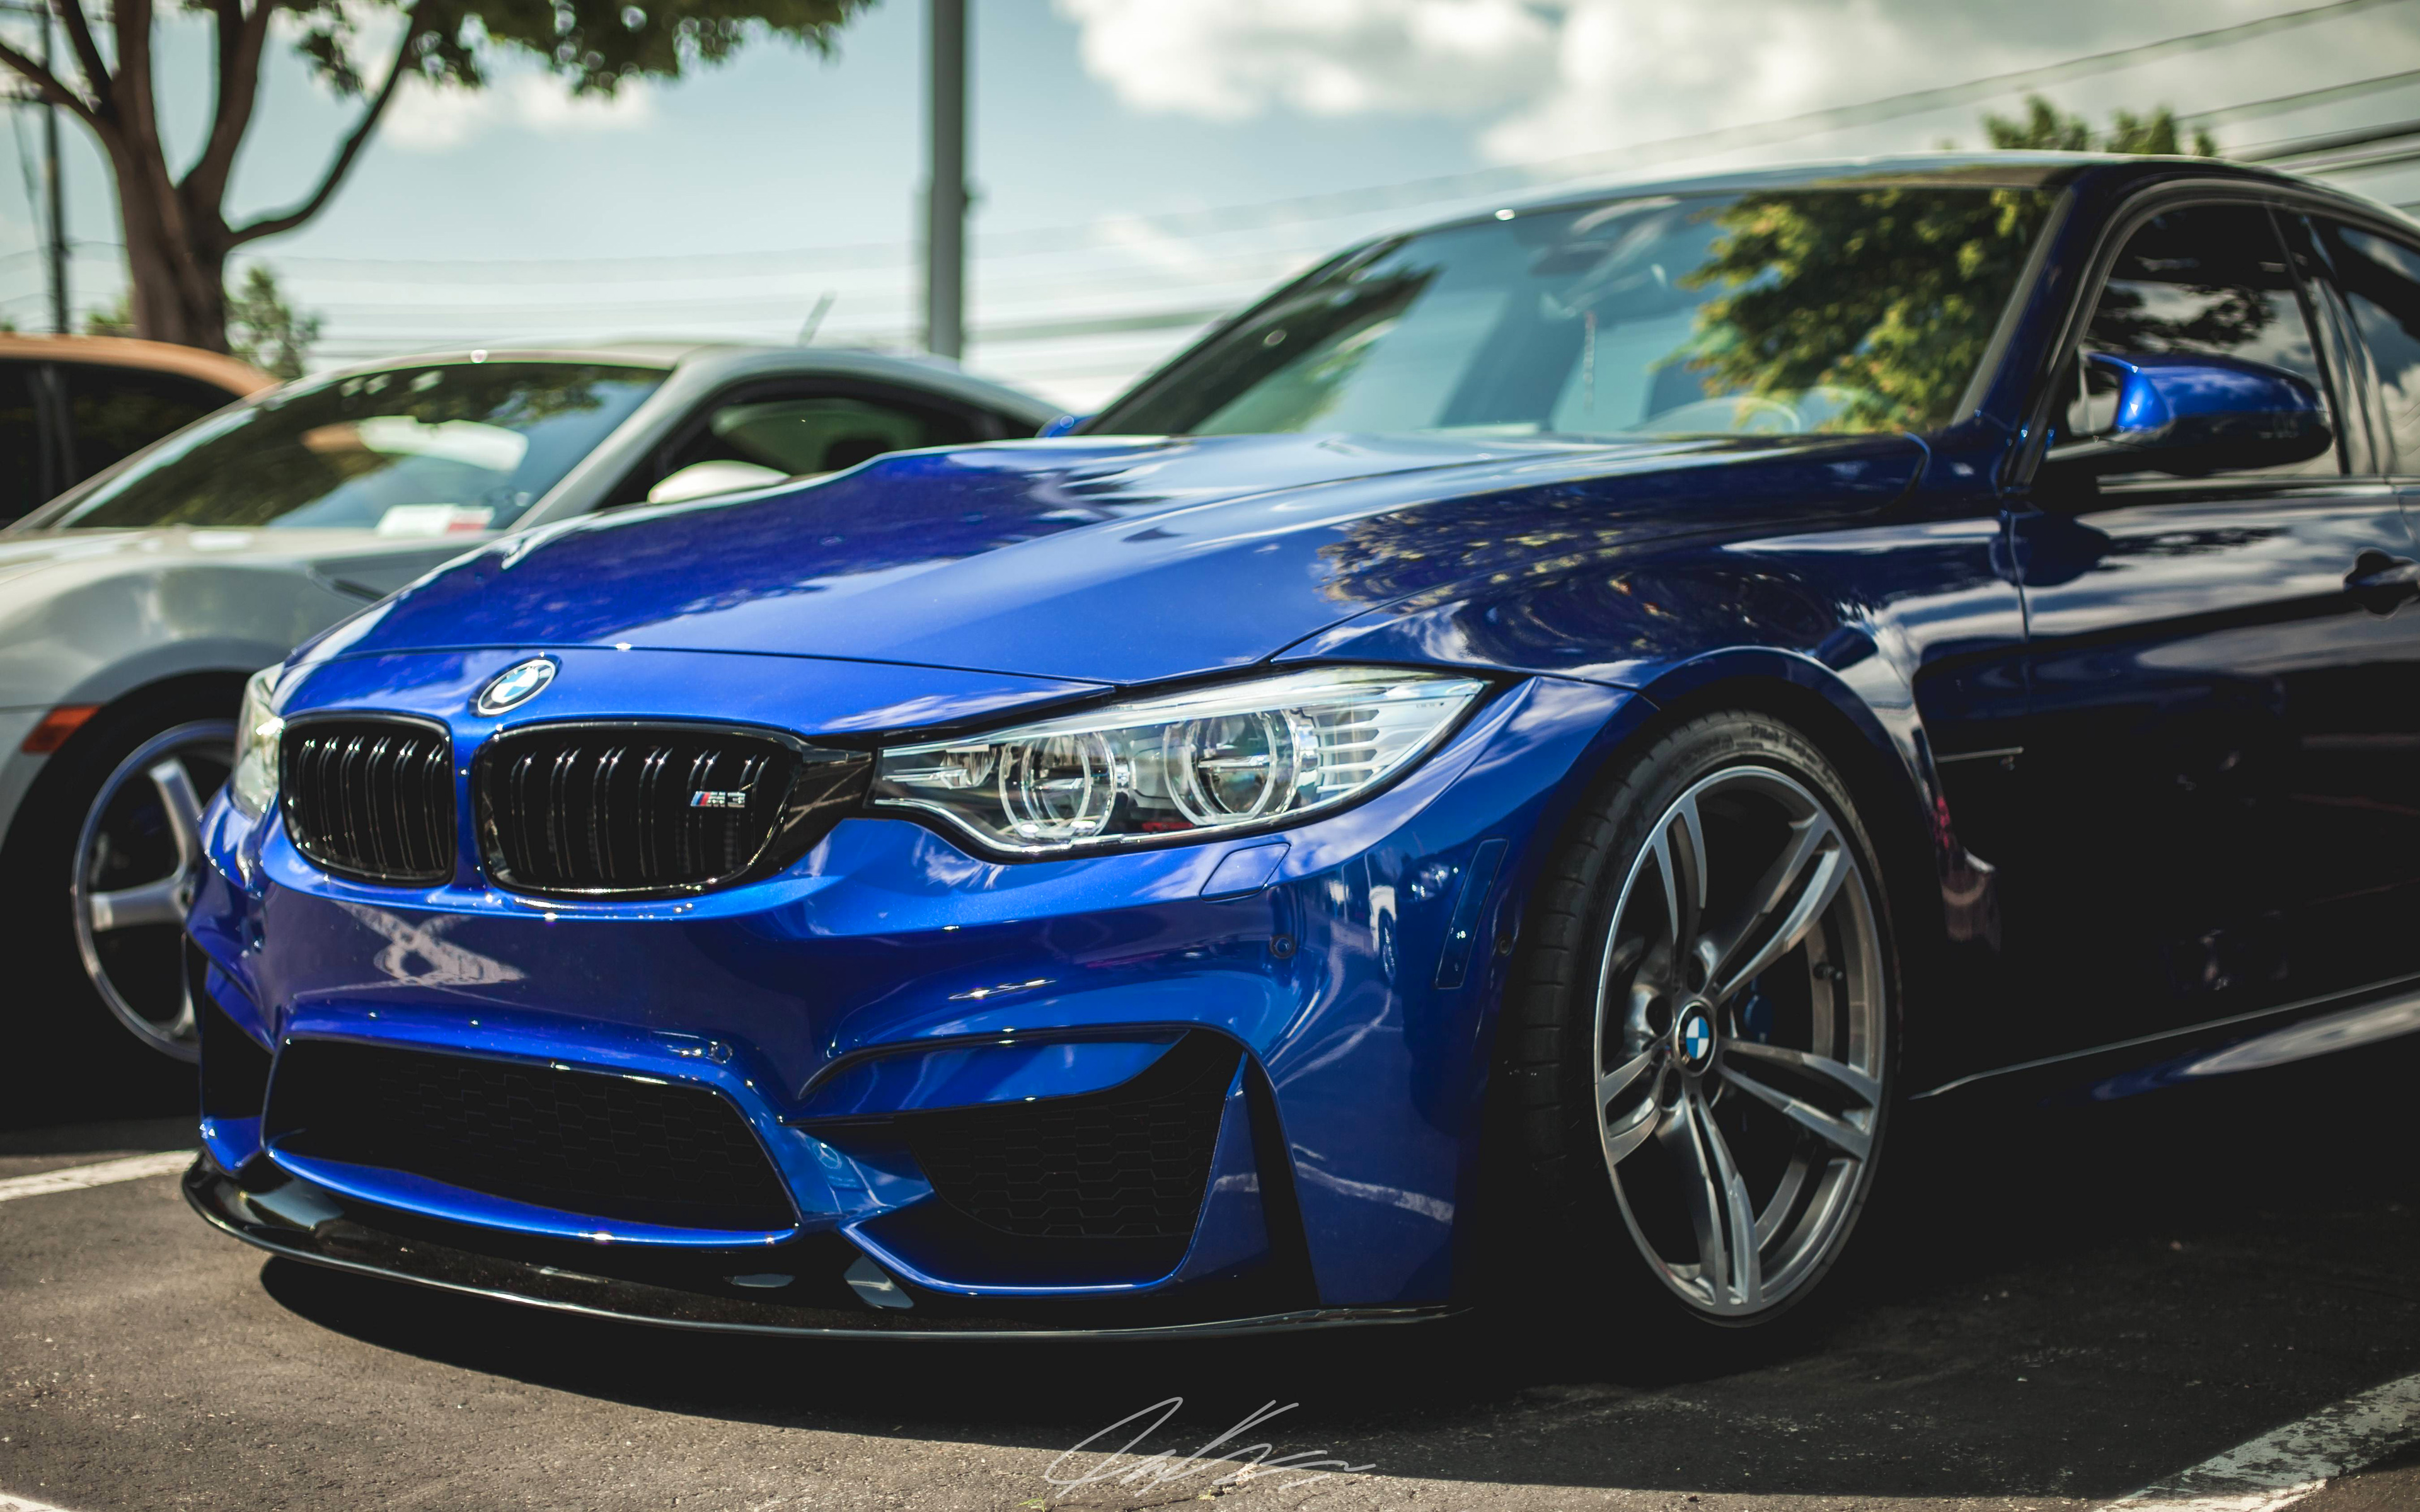 Download wallpapers 4k, BMW M3, F80, 2017 cars, tuning, blue m3, german cars, BMW for desktop with resolution 3840x2400. High Quality HD pictures wallpapers